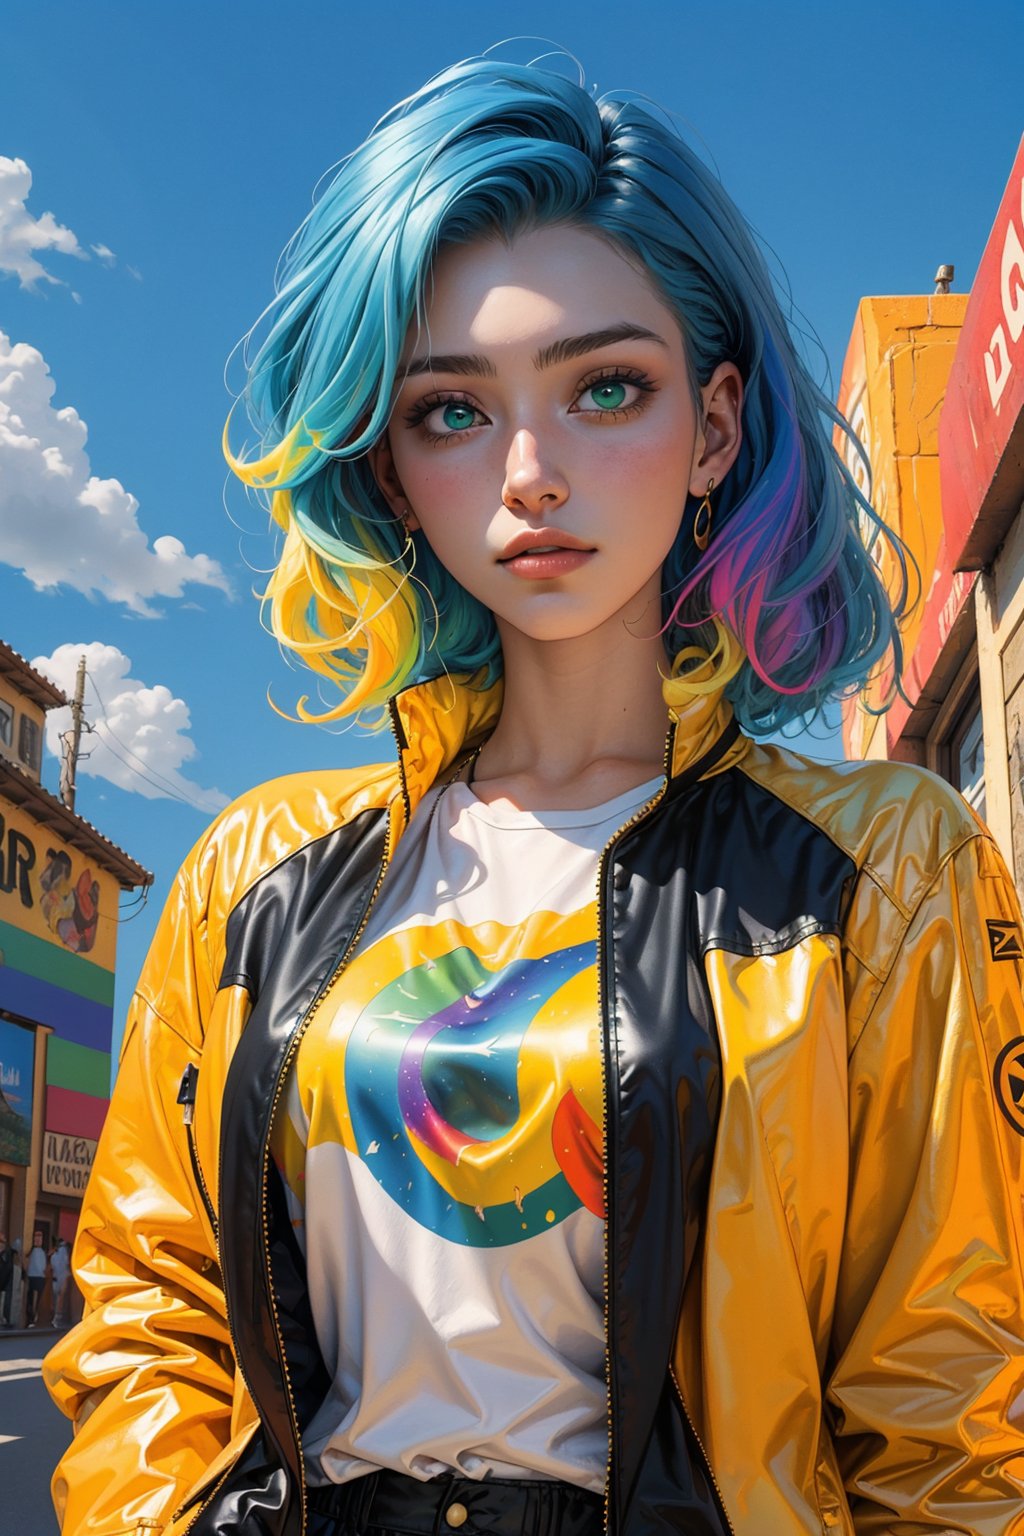 1girl, solo, a beautiful woman, 19 years old, oil painting, impasto, looking at viewer, wavy multicolored rainbow hair, yellow,  blue_green eyes, tomboy aesthetic, blue jacket, yellow t-shirt, urban psychedelic outfit, psychedelic  background, masterpiece, ,sciamano240, soft shading, soft shading, Vee